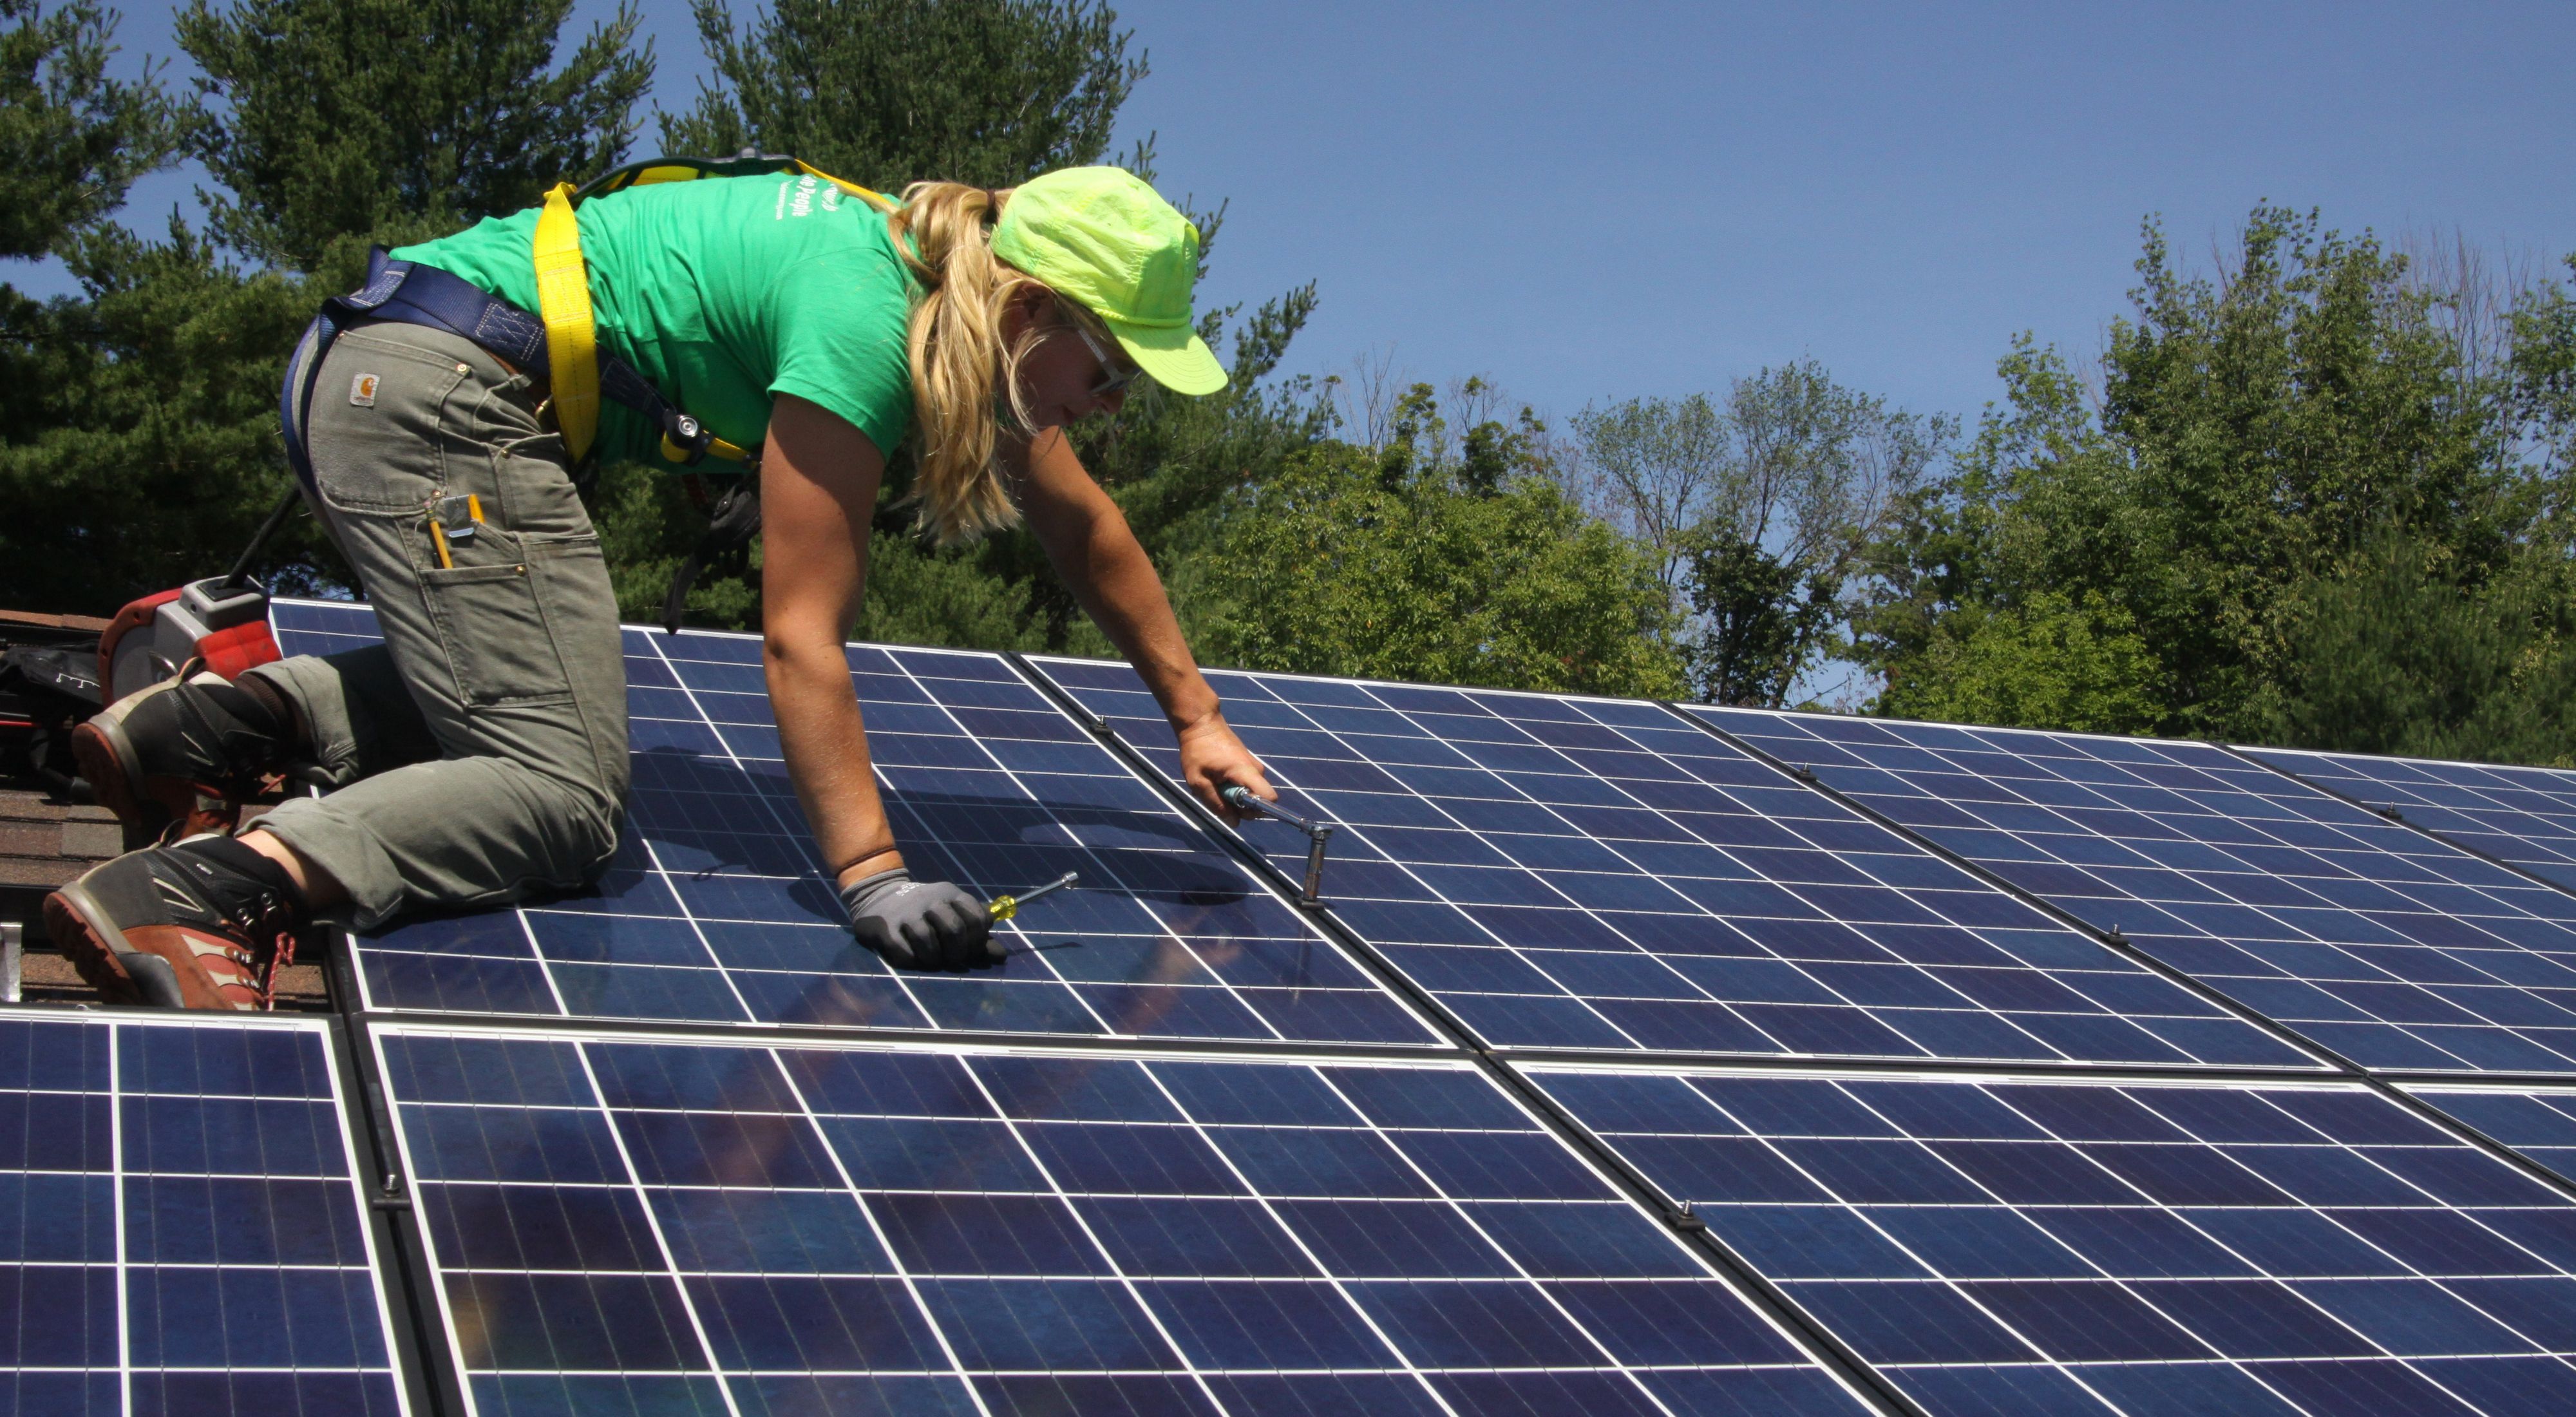 A worker installs solar panels on a roof during a sunny day. 